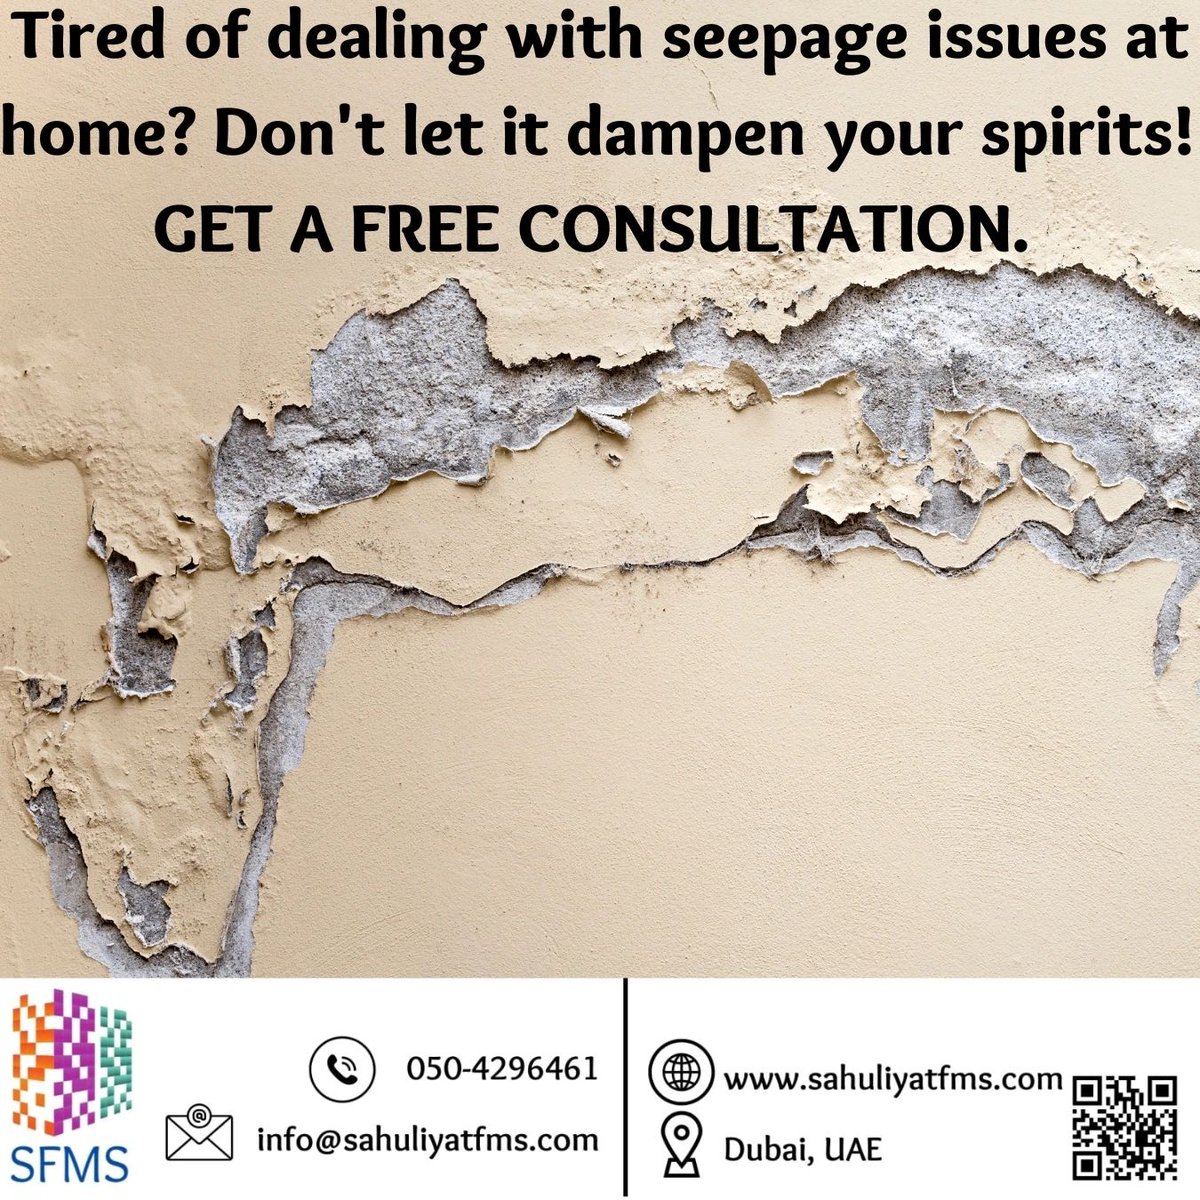 Tired of seepage issues? Let's transform your space today! #SeepageSolutions #WaterproofingExperts #WaterproofingServices #LeakagePrevention #HomeImprovement #SeepageProtection
Call/WhatsApp: 050-4296461, Email: info@sahuliyatfms.com, Website: sahuliyatfms.com